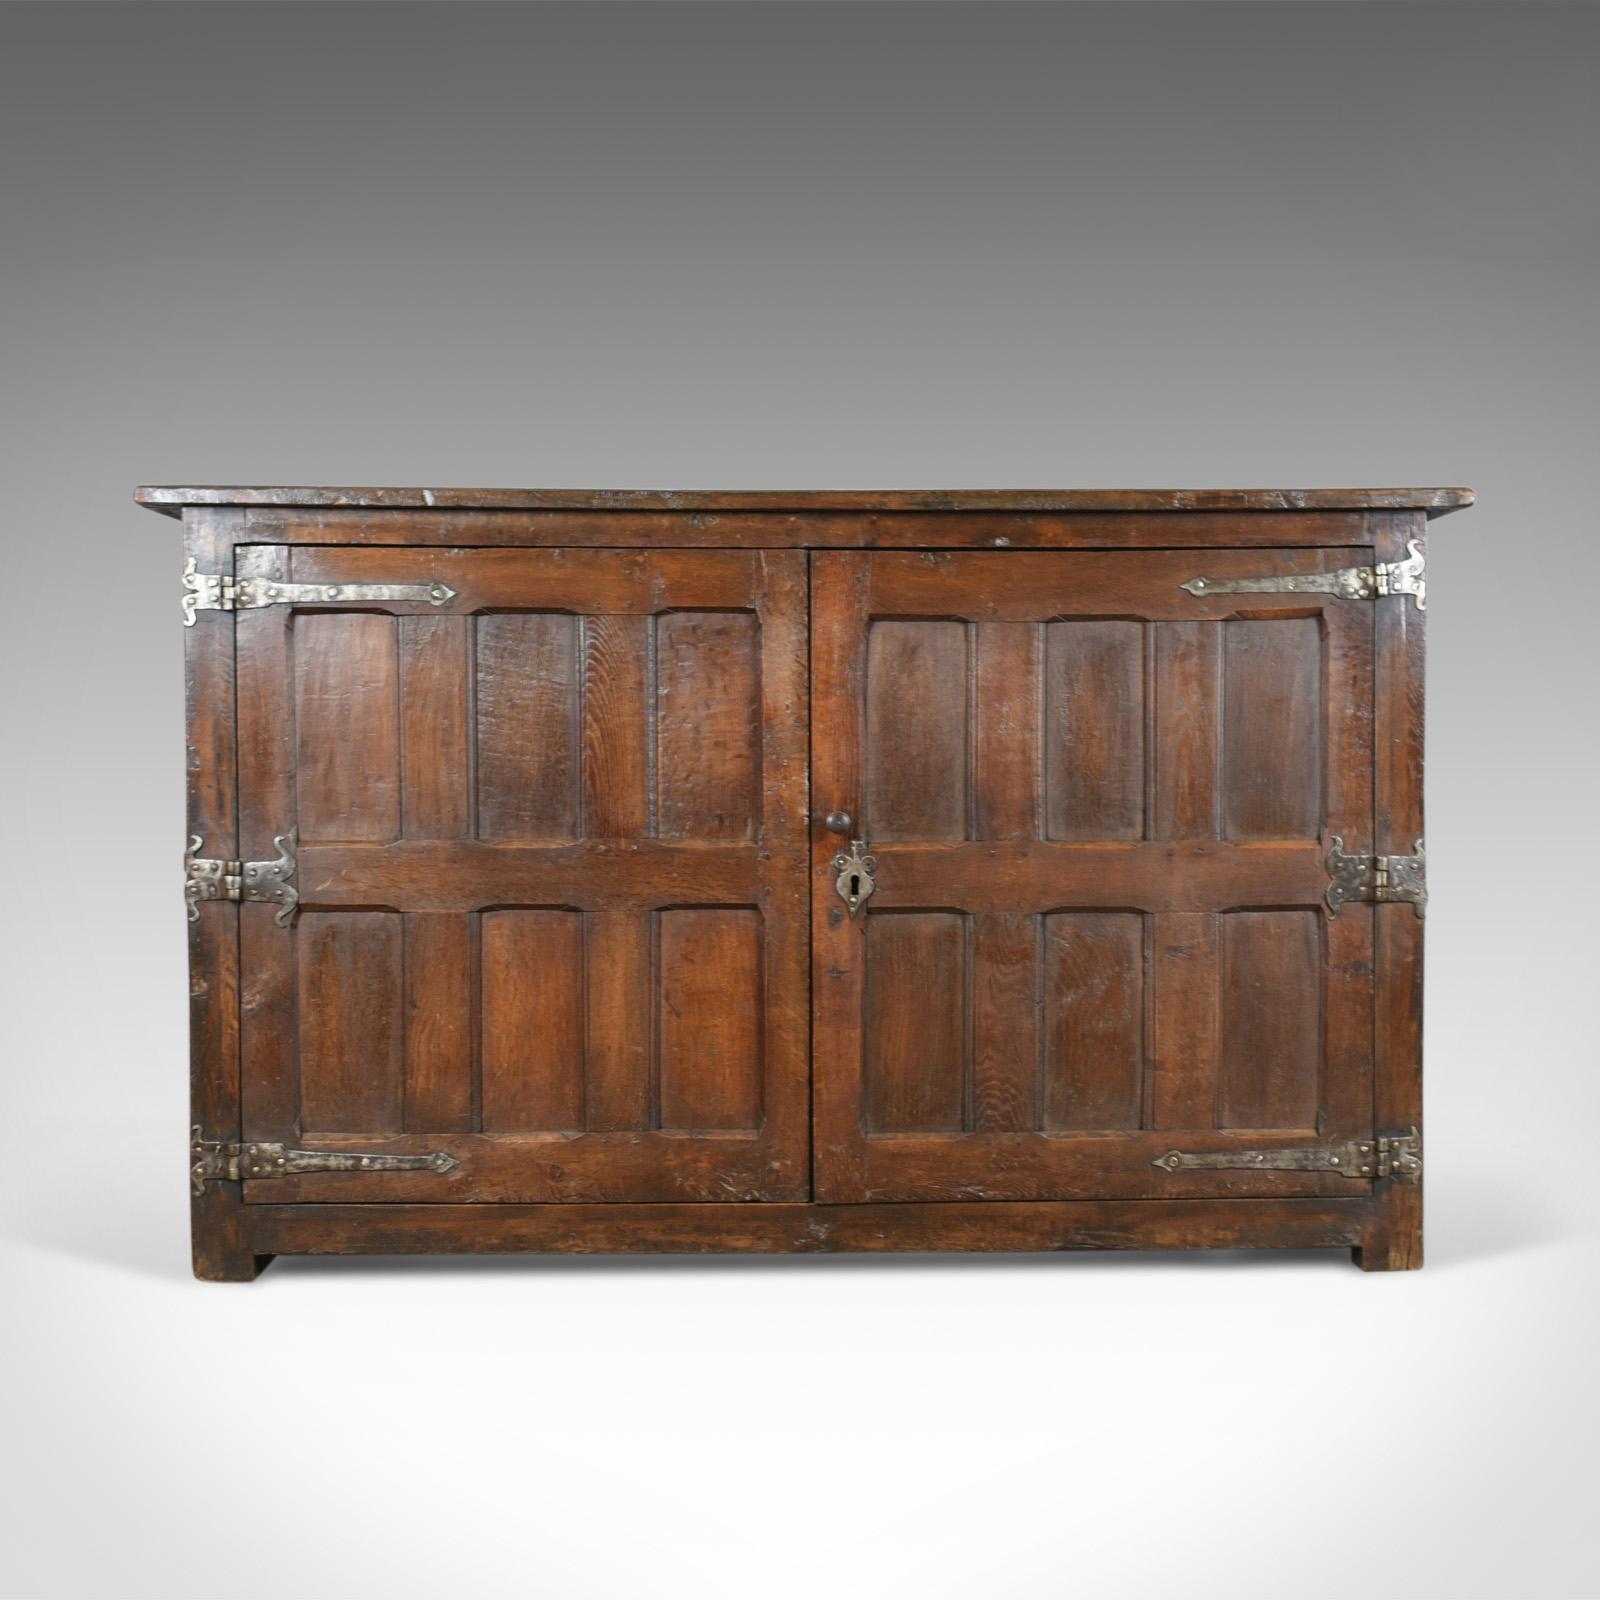 This is an appealing antique long cupboard. A large and heavy, early English oak paneled cupboard dating to the 17th century and later.

Fabulous early oak panel, pegged construction
Good colour, displaying grain interest with wisps of medullary